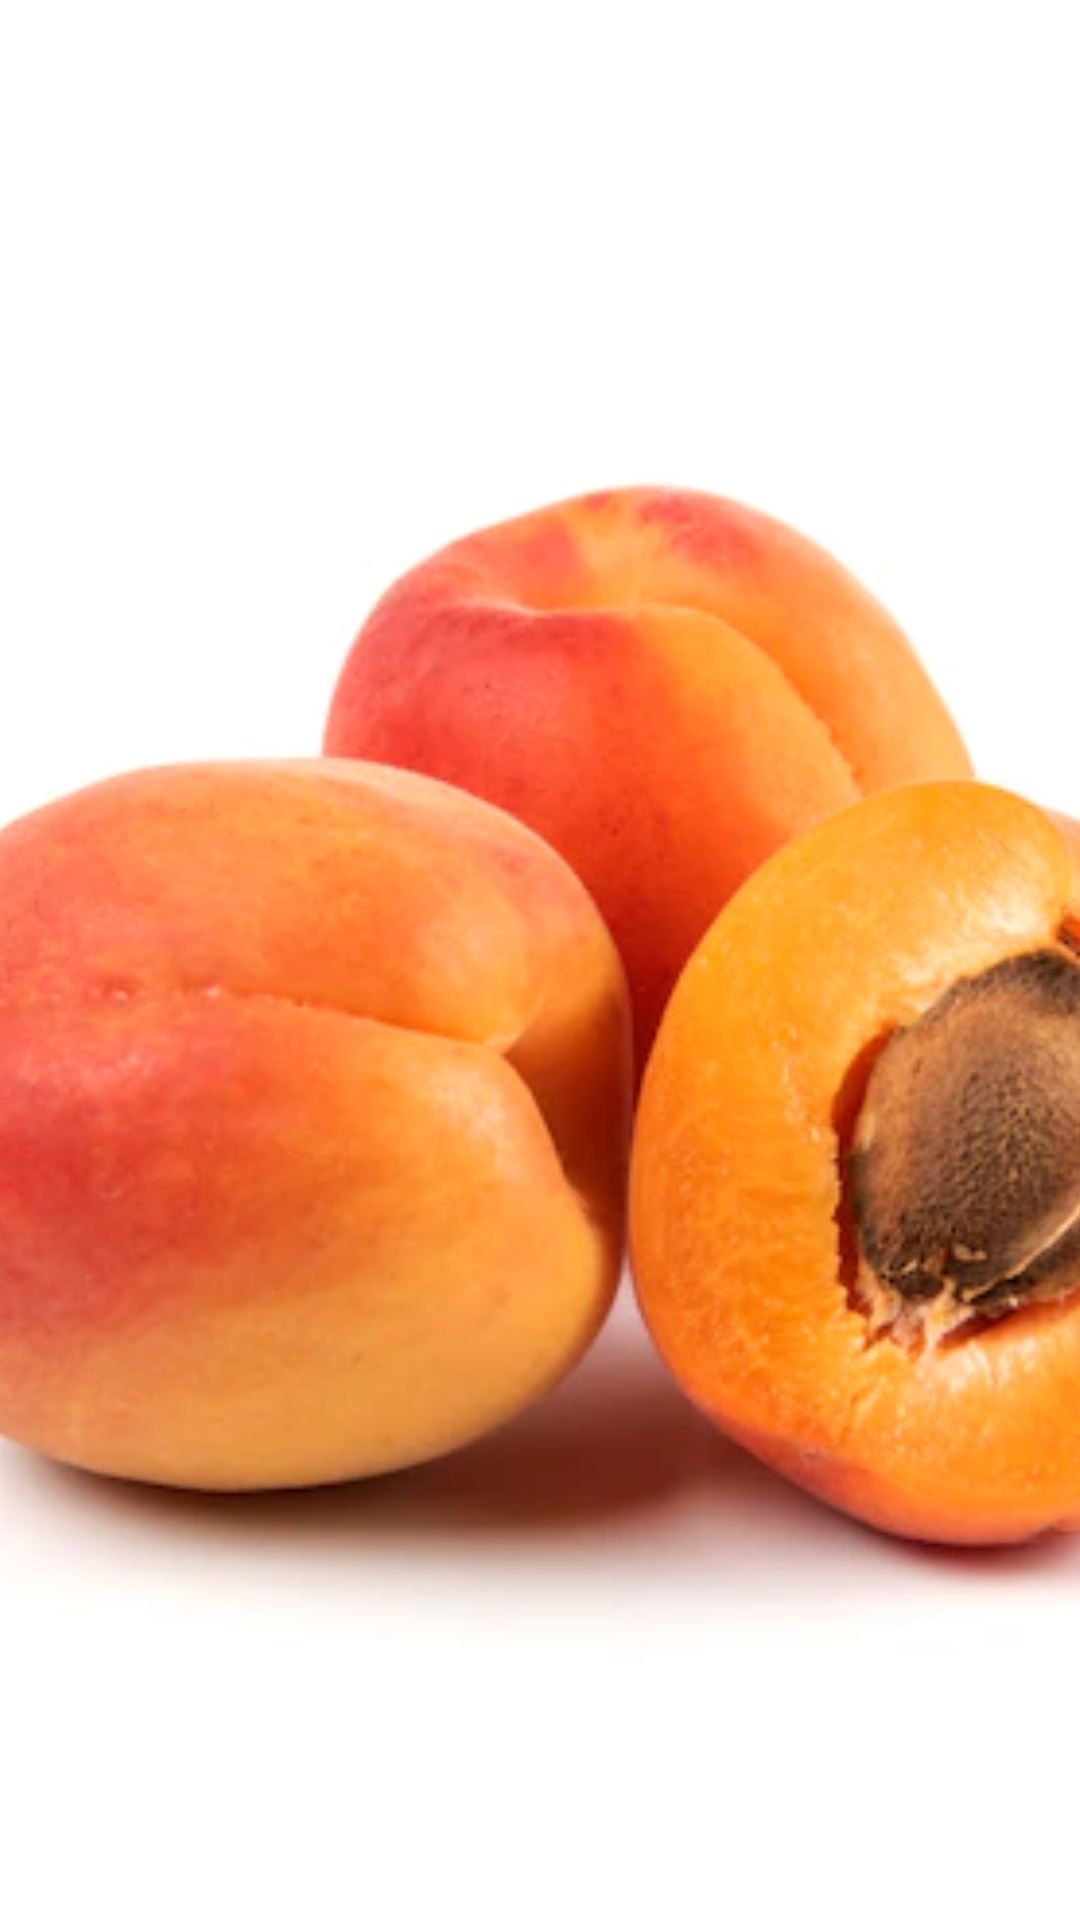 Apricots are a good source of dietary fiber which is beneficial for health